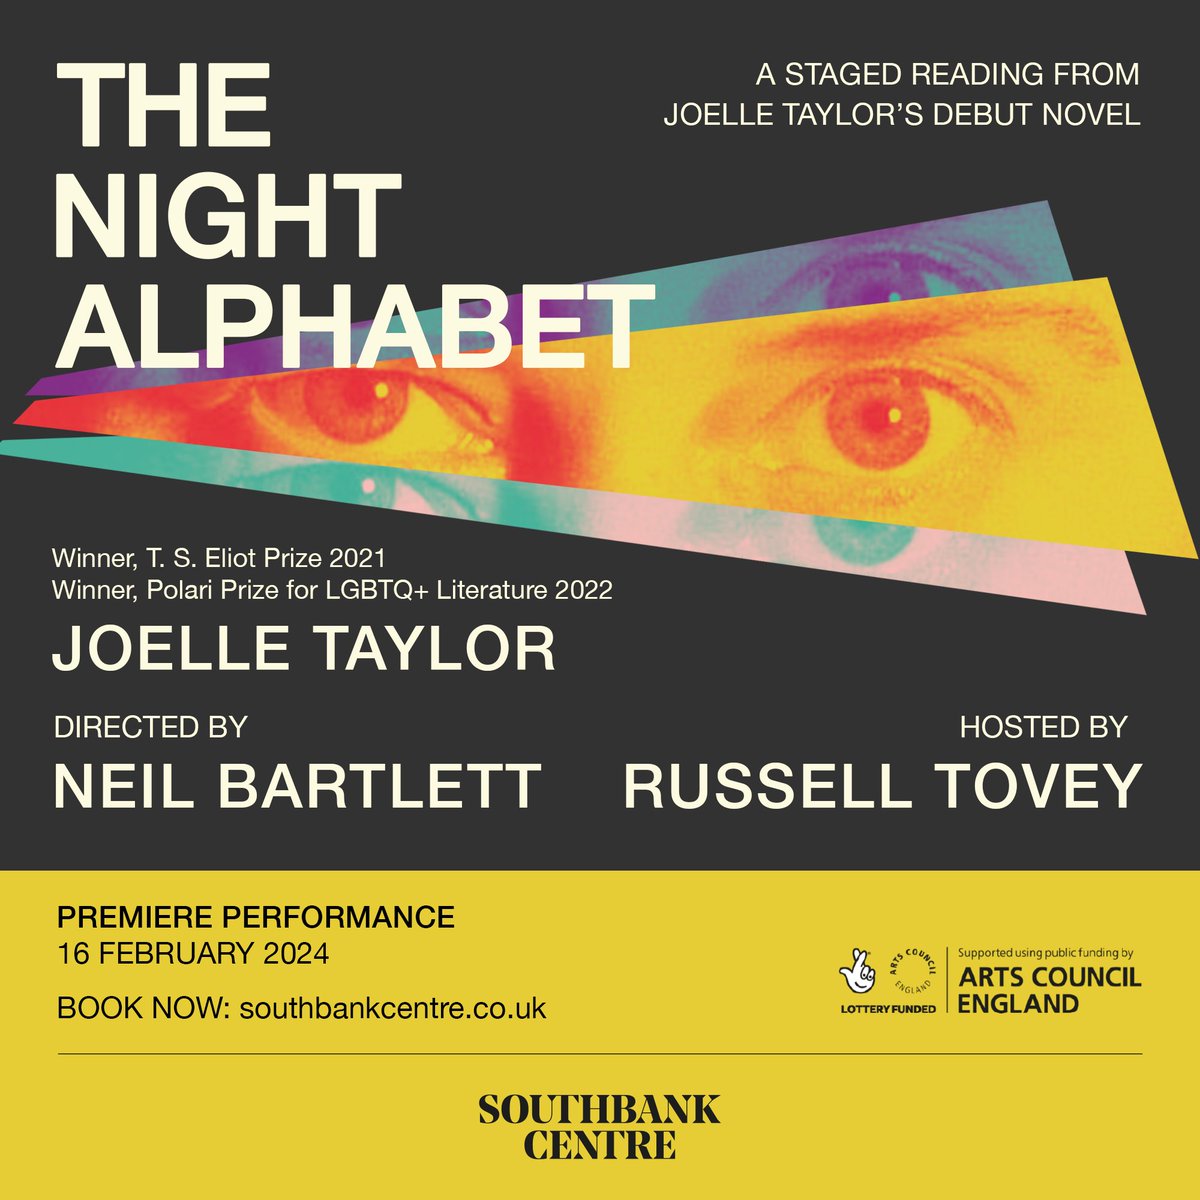 We're so looking forward to seeing @JTaylorTrash at @southbankcentre doing a staged reading from #TheNightAlphabet her debut novel on 16/02/24, don't miss this! - bit.ly/4bd5Dnh

#poetry #Literature #tseliotprize #polariprize #LGBTQ @OutSpokenLDN